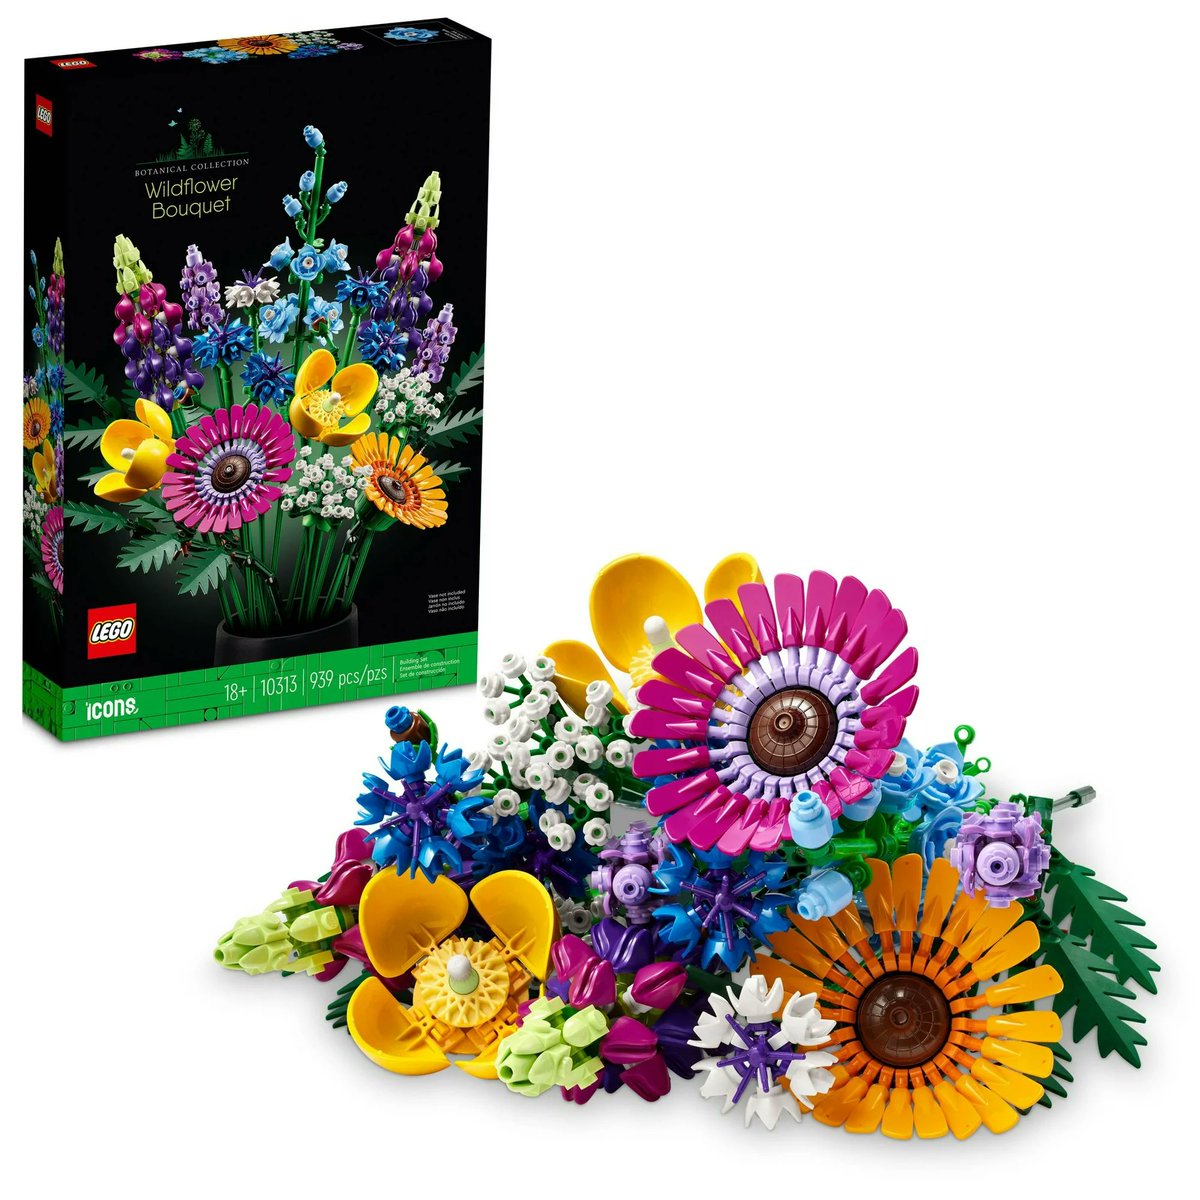 LEGO Icons Wildflower Bouquet Set - Artificial Flowers with Poppies and Lavender -- Save $12 -- JUST $47.99 goto.walmart.com/c/2522200/5657… #lego #legos #wildflowers #wildflower #mothersdaygifts #mothersdaygift #gifts #gift #mothersday #lastminutegifts #legoblocks #deals #toydeals